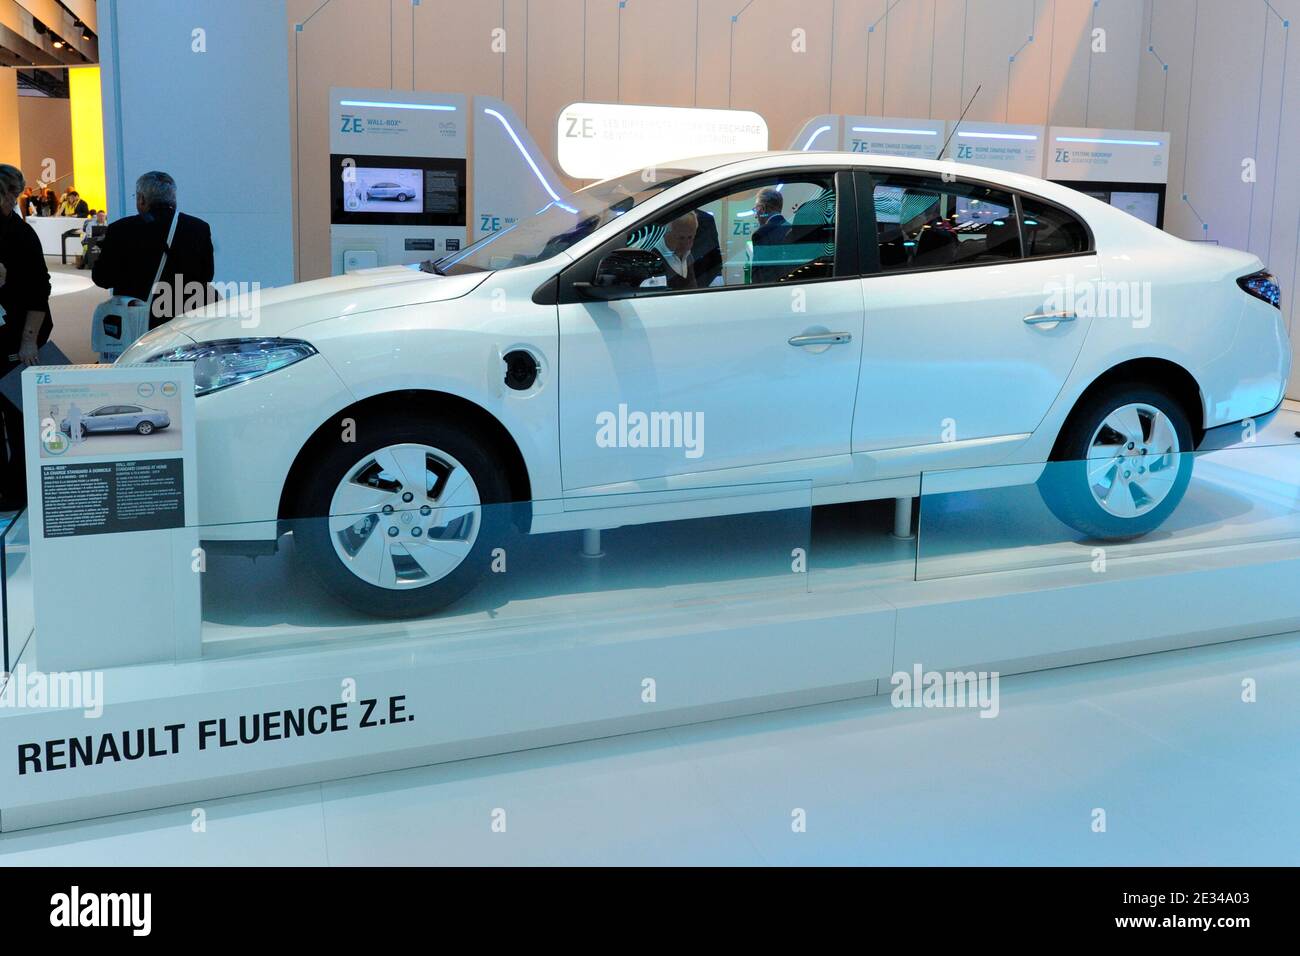 New Renault Fluence ZE electrical car at the Paris Motor Show 'Mondial de l' Automobile' in Paris, France on September 30, 2010. The Paris Motor Show takes place every two years and is one of the largest expositions of motor vehicles in the world. This year, the emphasis of the show lies on electric cars and more than 300 exhibitors from 20 countries are expected to take part. Photo by Henri Szwarc/ABACAPRESS.COM Stock Photo